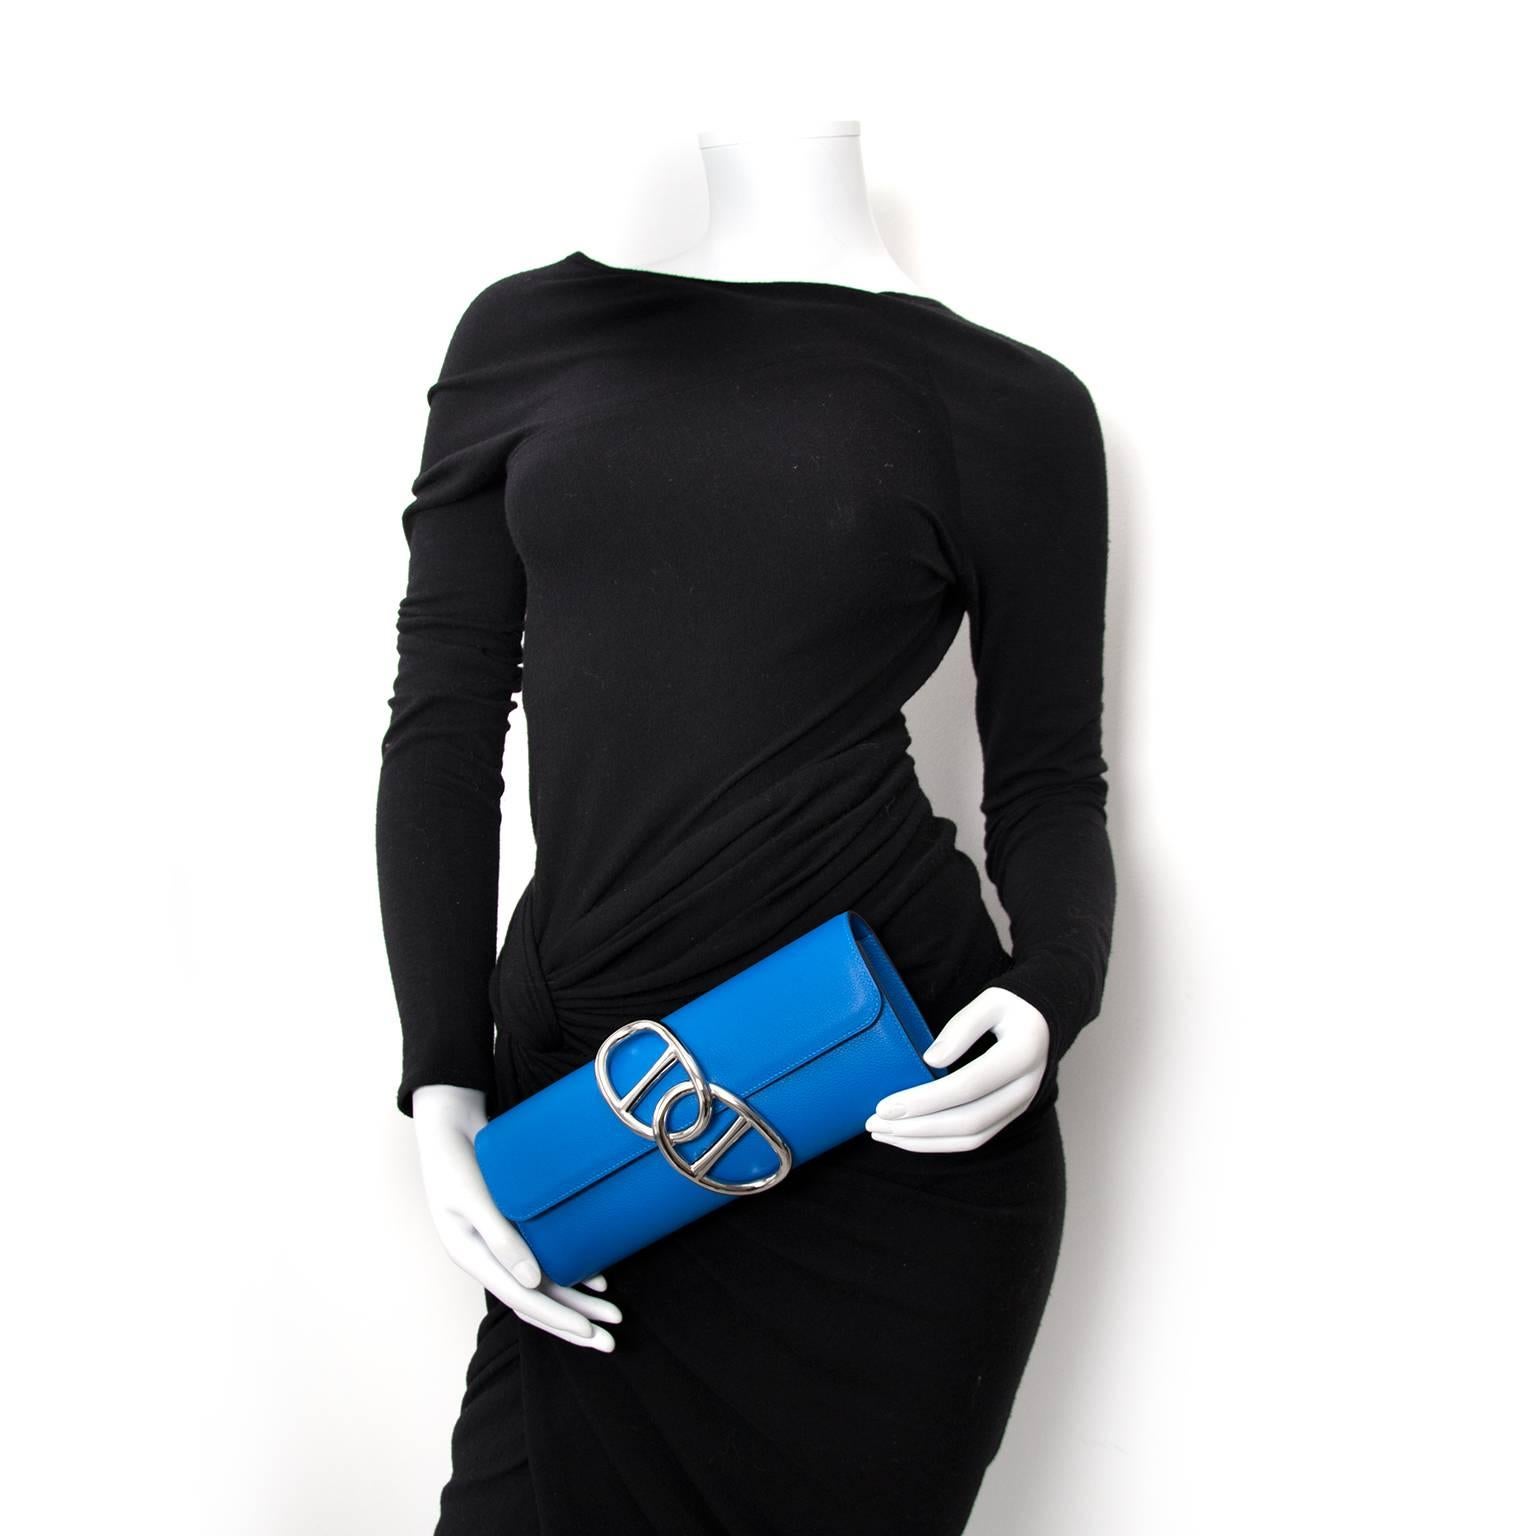 Brand New

Estimated retail price €3150

 Brand New Hermes Pochette Egee Blue Hydra Veau Evercolor

This stylish clutch is crafted of veau evercolor leather in the vibrant bleu Hydra  color. The clutch features a double palladium Chain d Ancre and